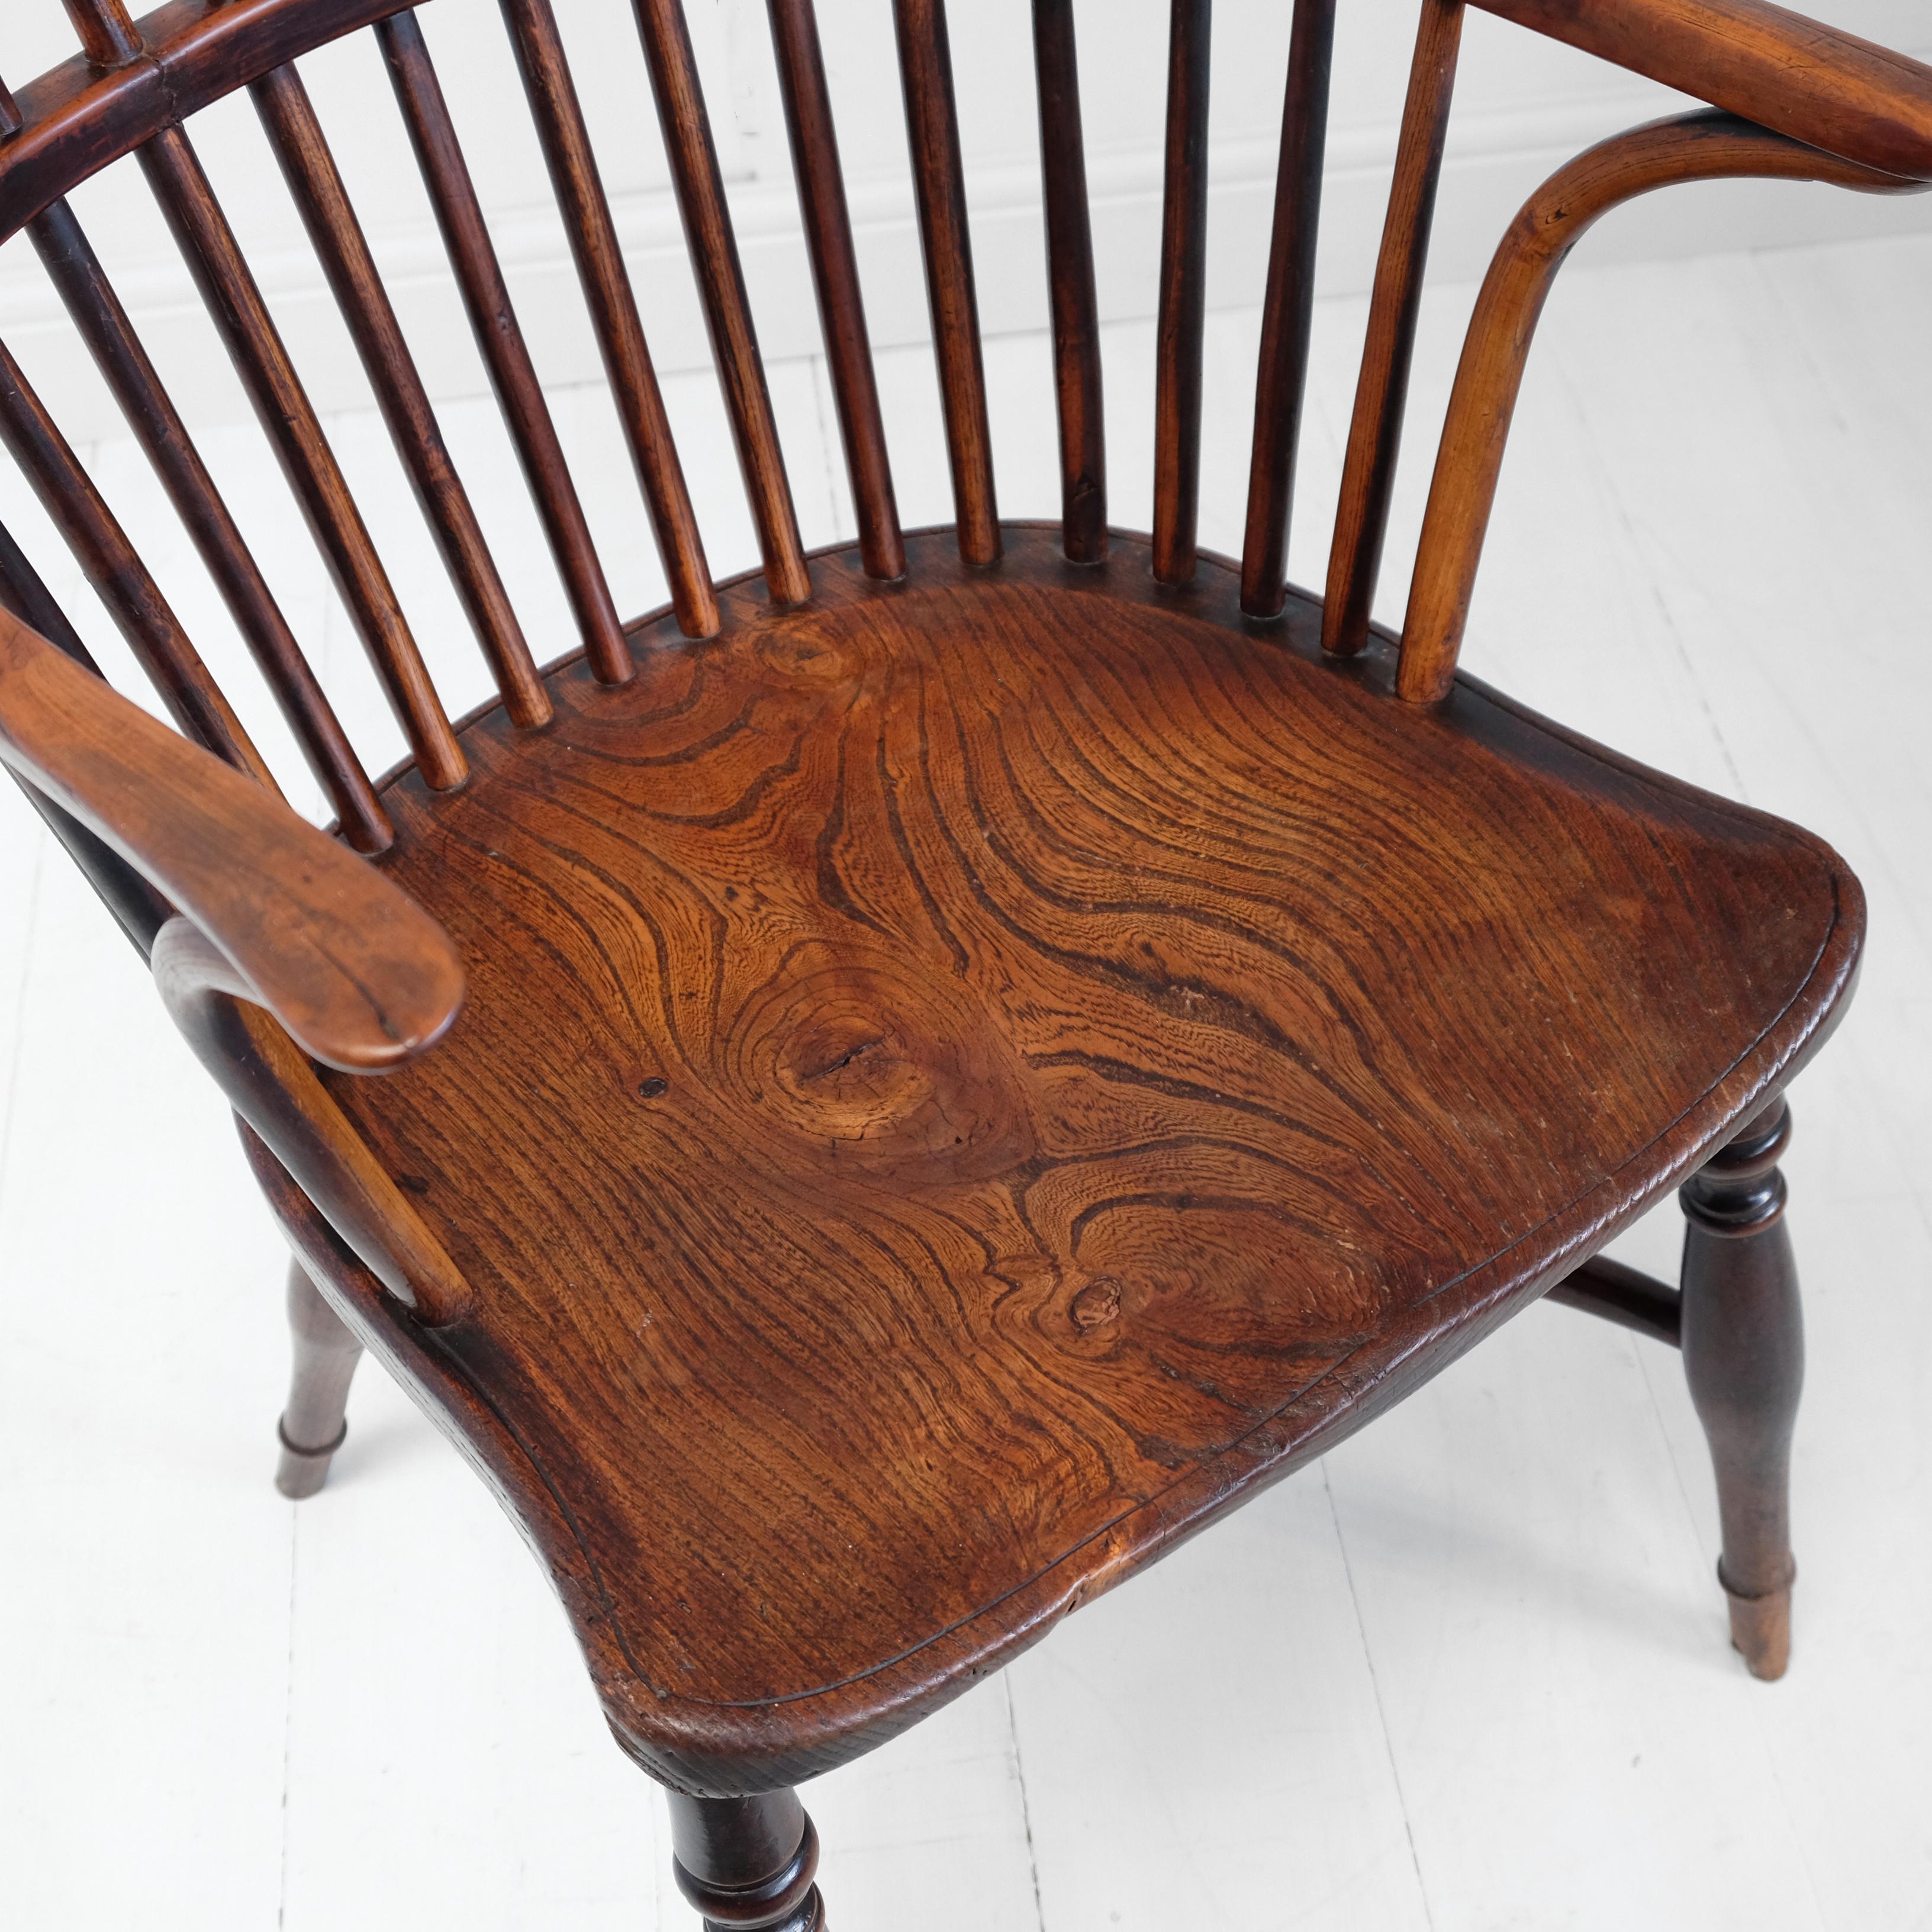 Hand-Carved Yew Wood Stick Back, English Windsor Chair, 19th Century, Lincolnshire Hoop Back